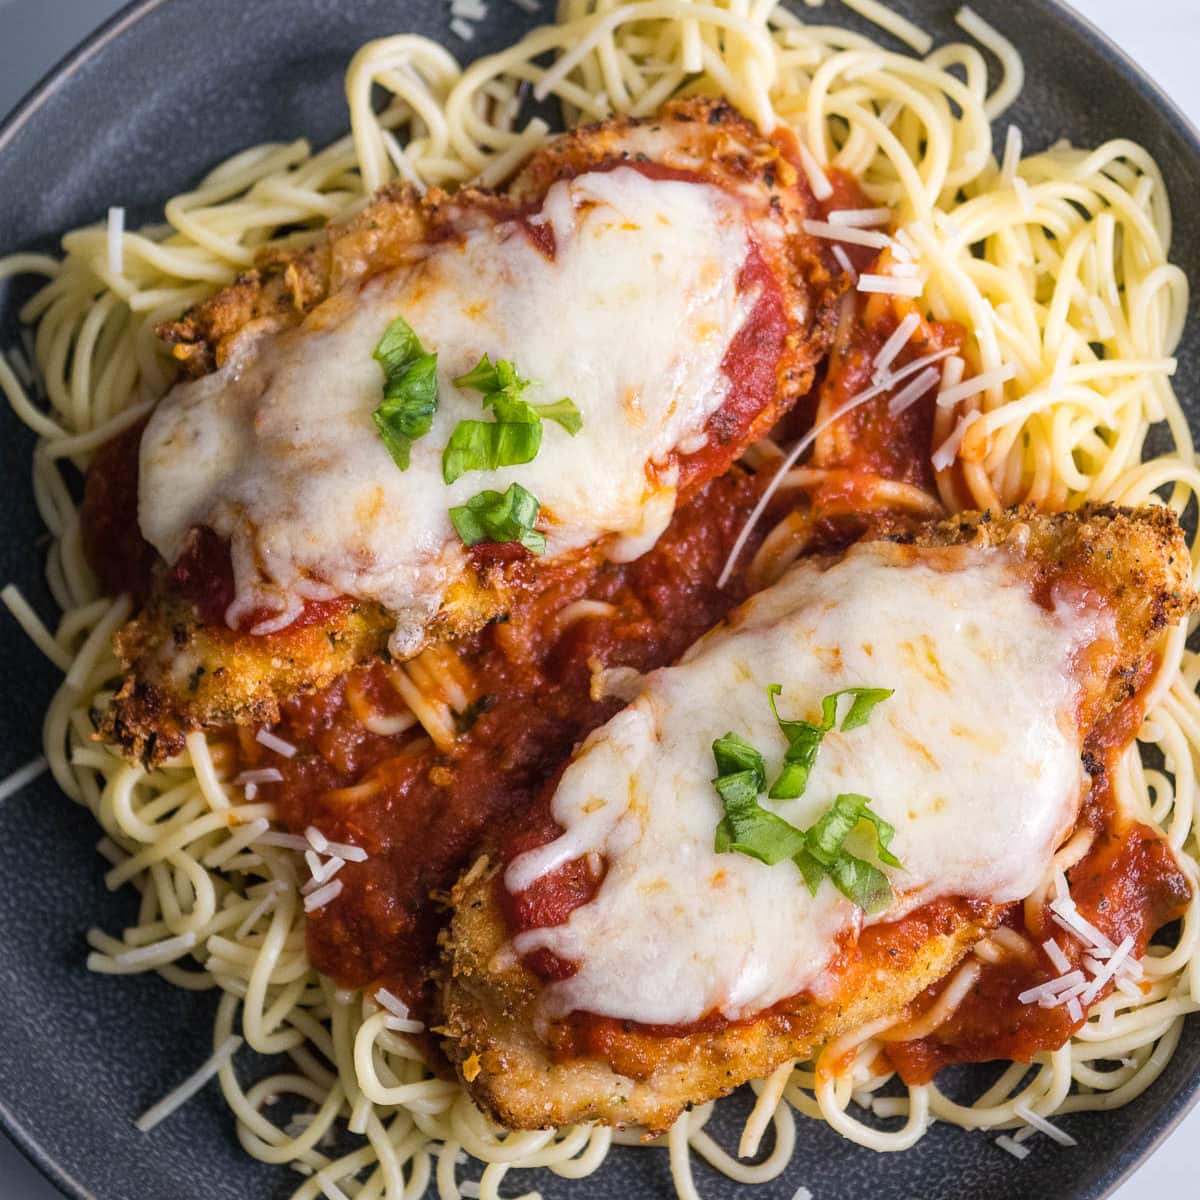 Pieces of chicken on a plate of spaghetti.